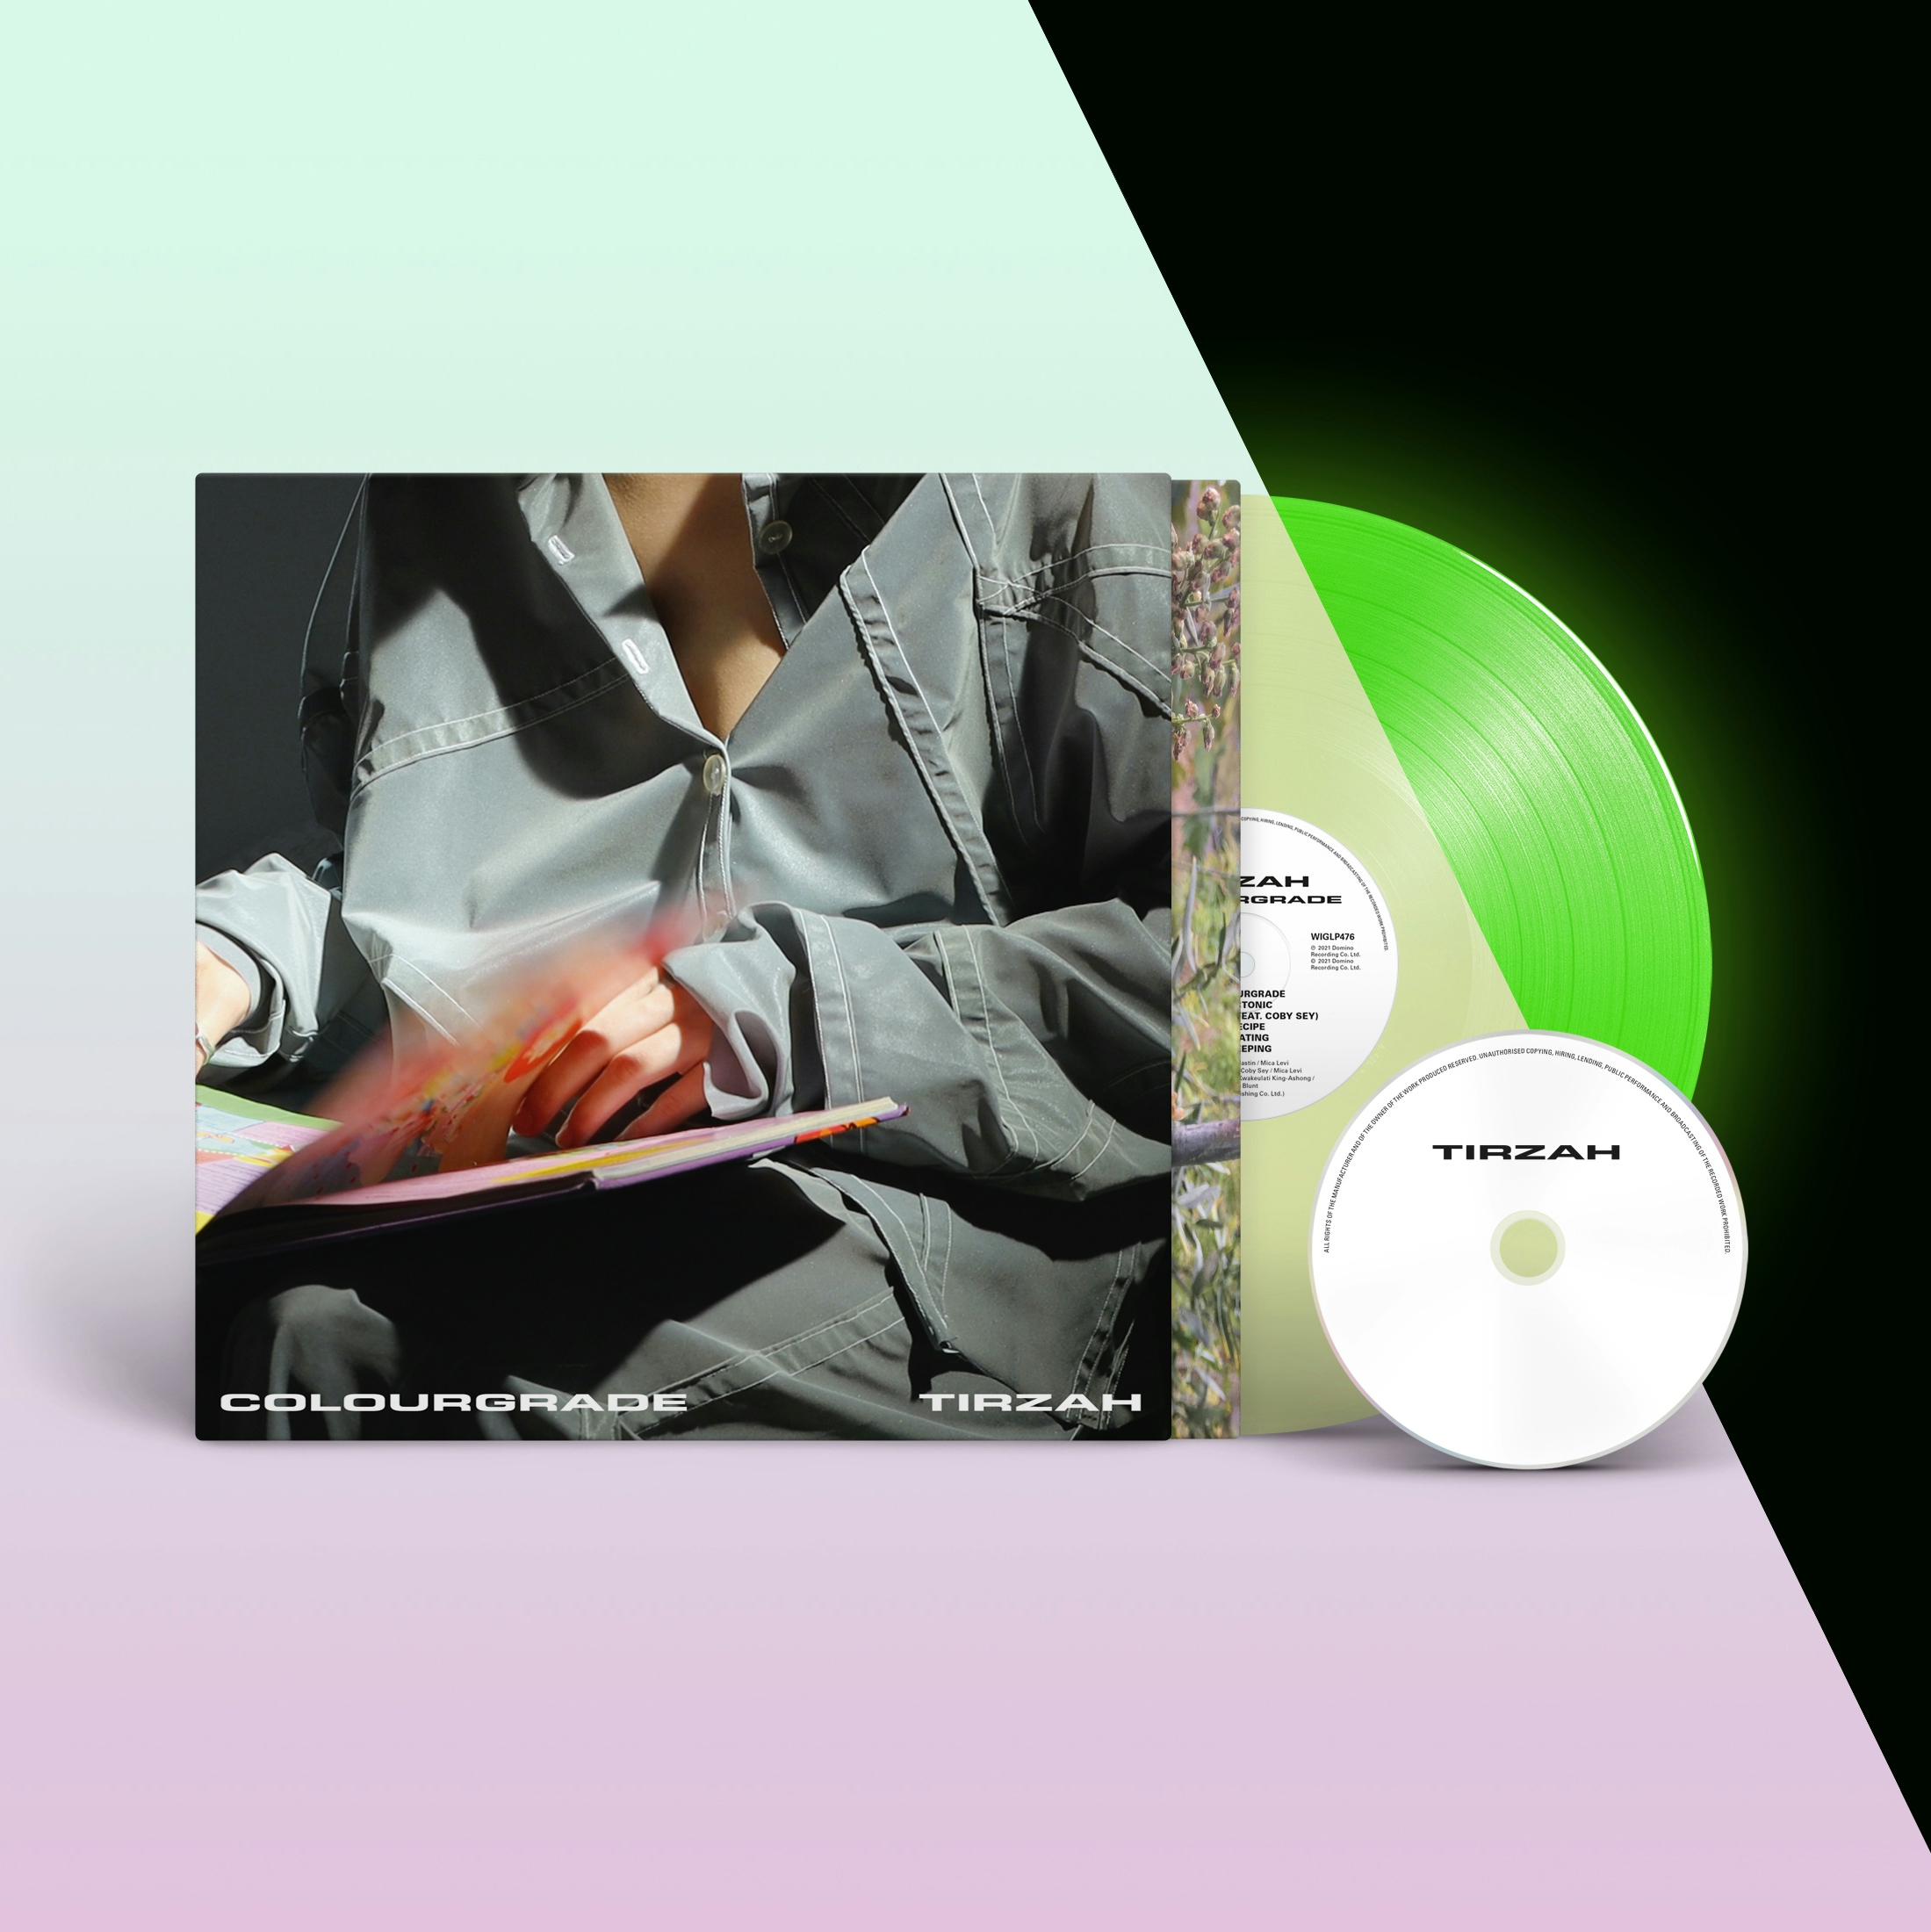 Album artwork for Album artwork for Colourgrade by Tirzah by Colourgrade - Tirzah